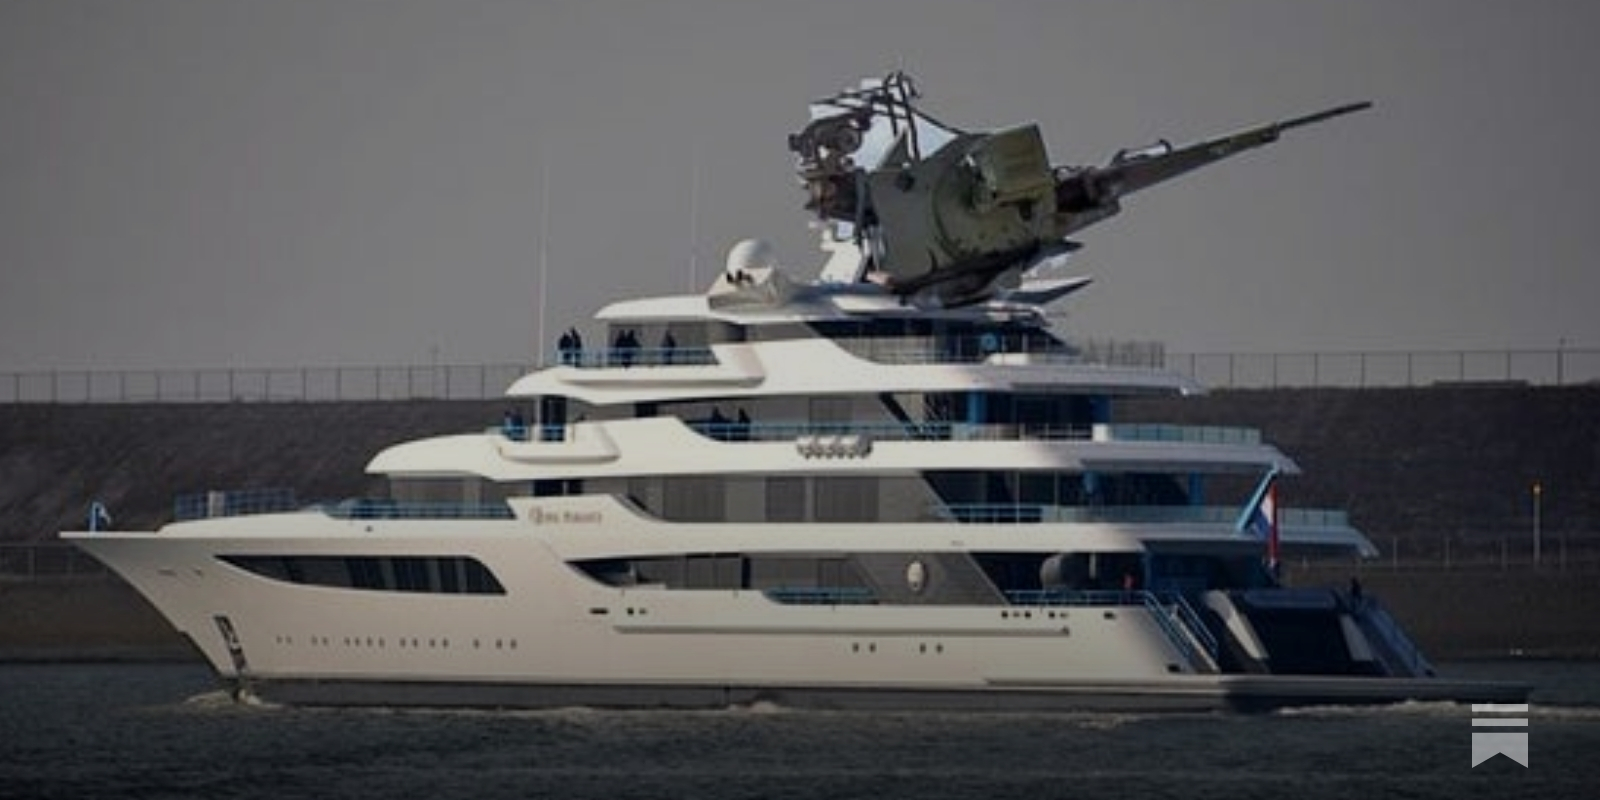 A #YachtWatch Update: A Sanctioned Russian Yacht Is Finally Being